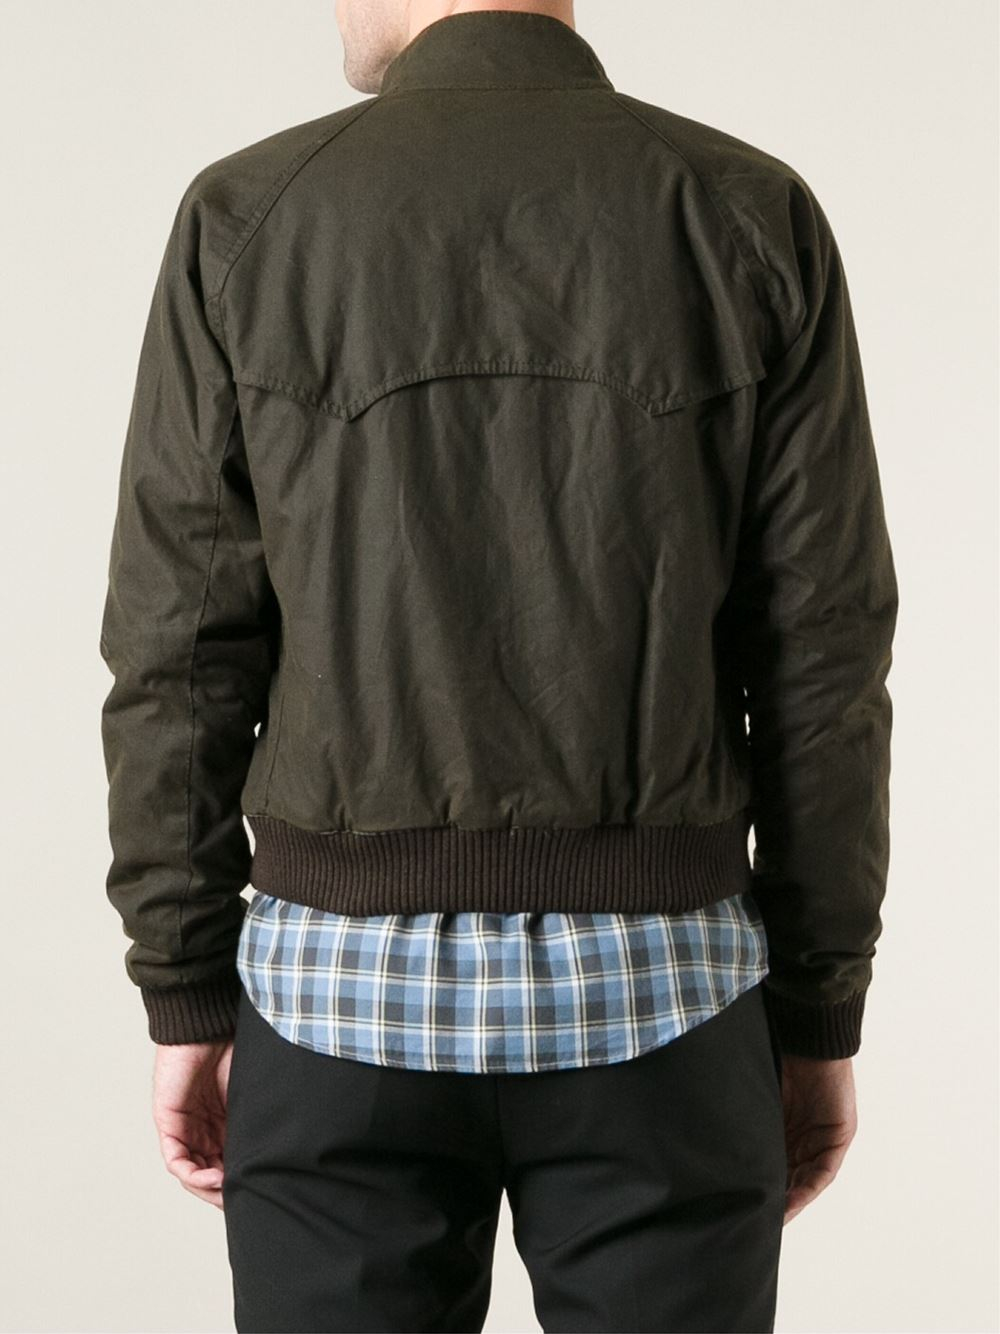 Lyst - Barbour Waxed Bomber Jacket in Green for Men